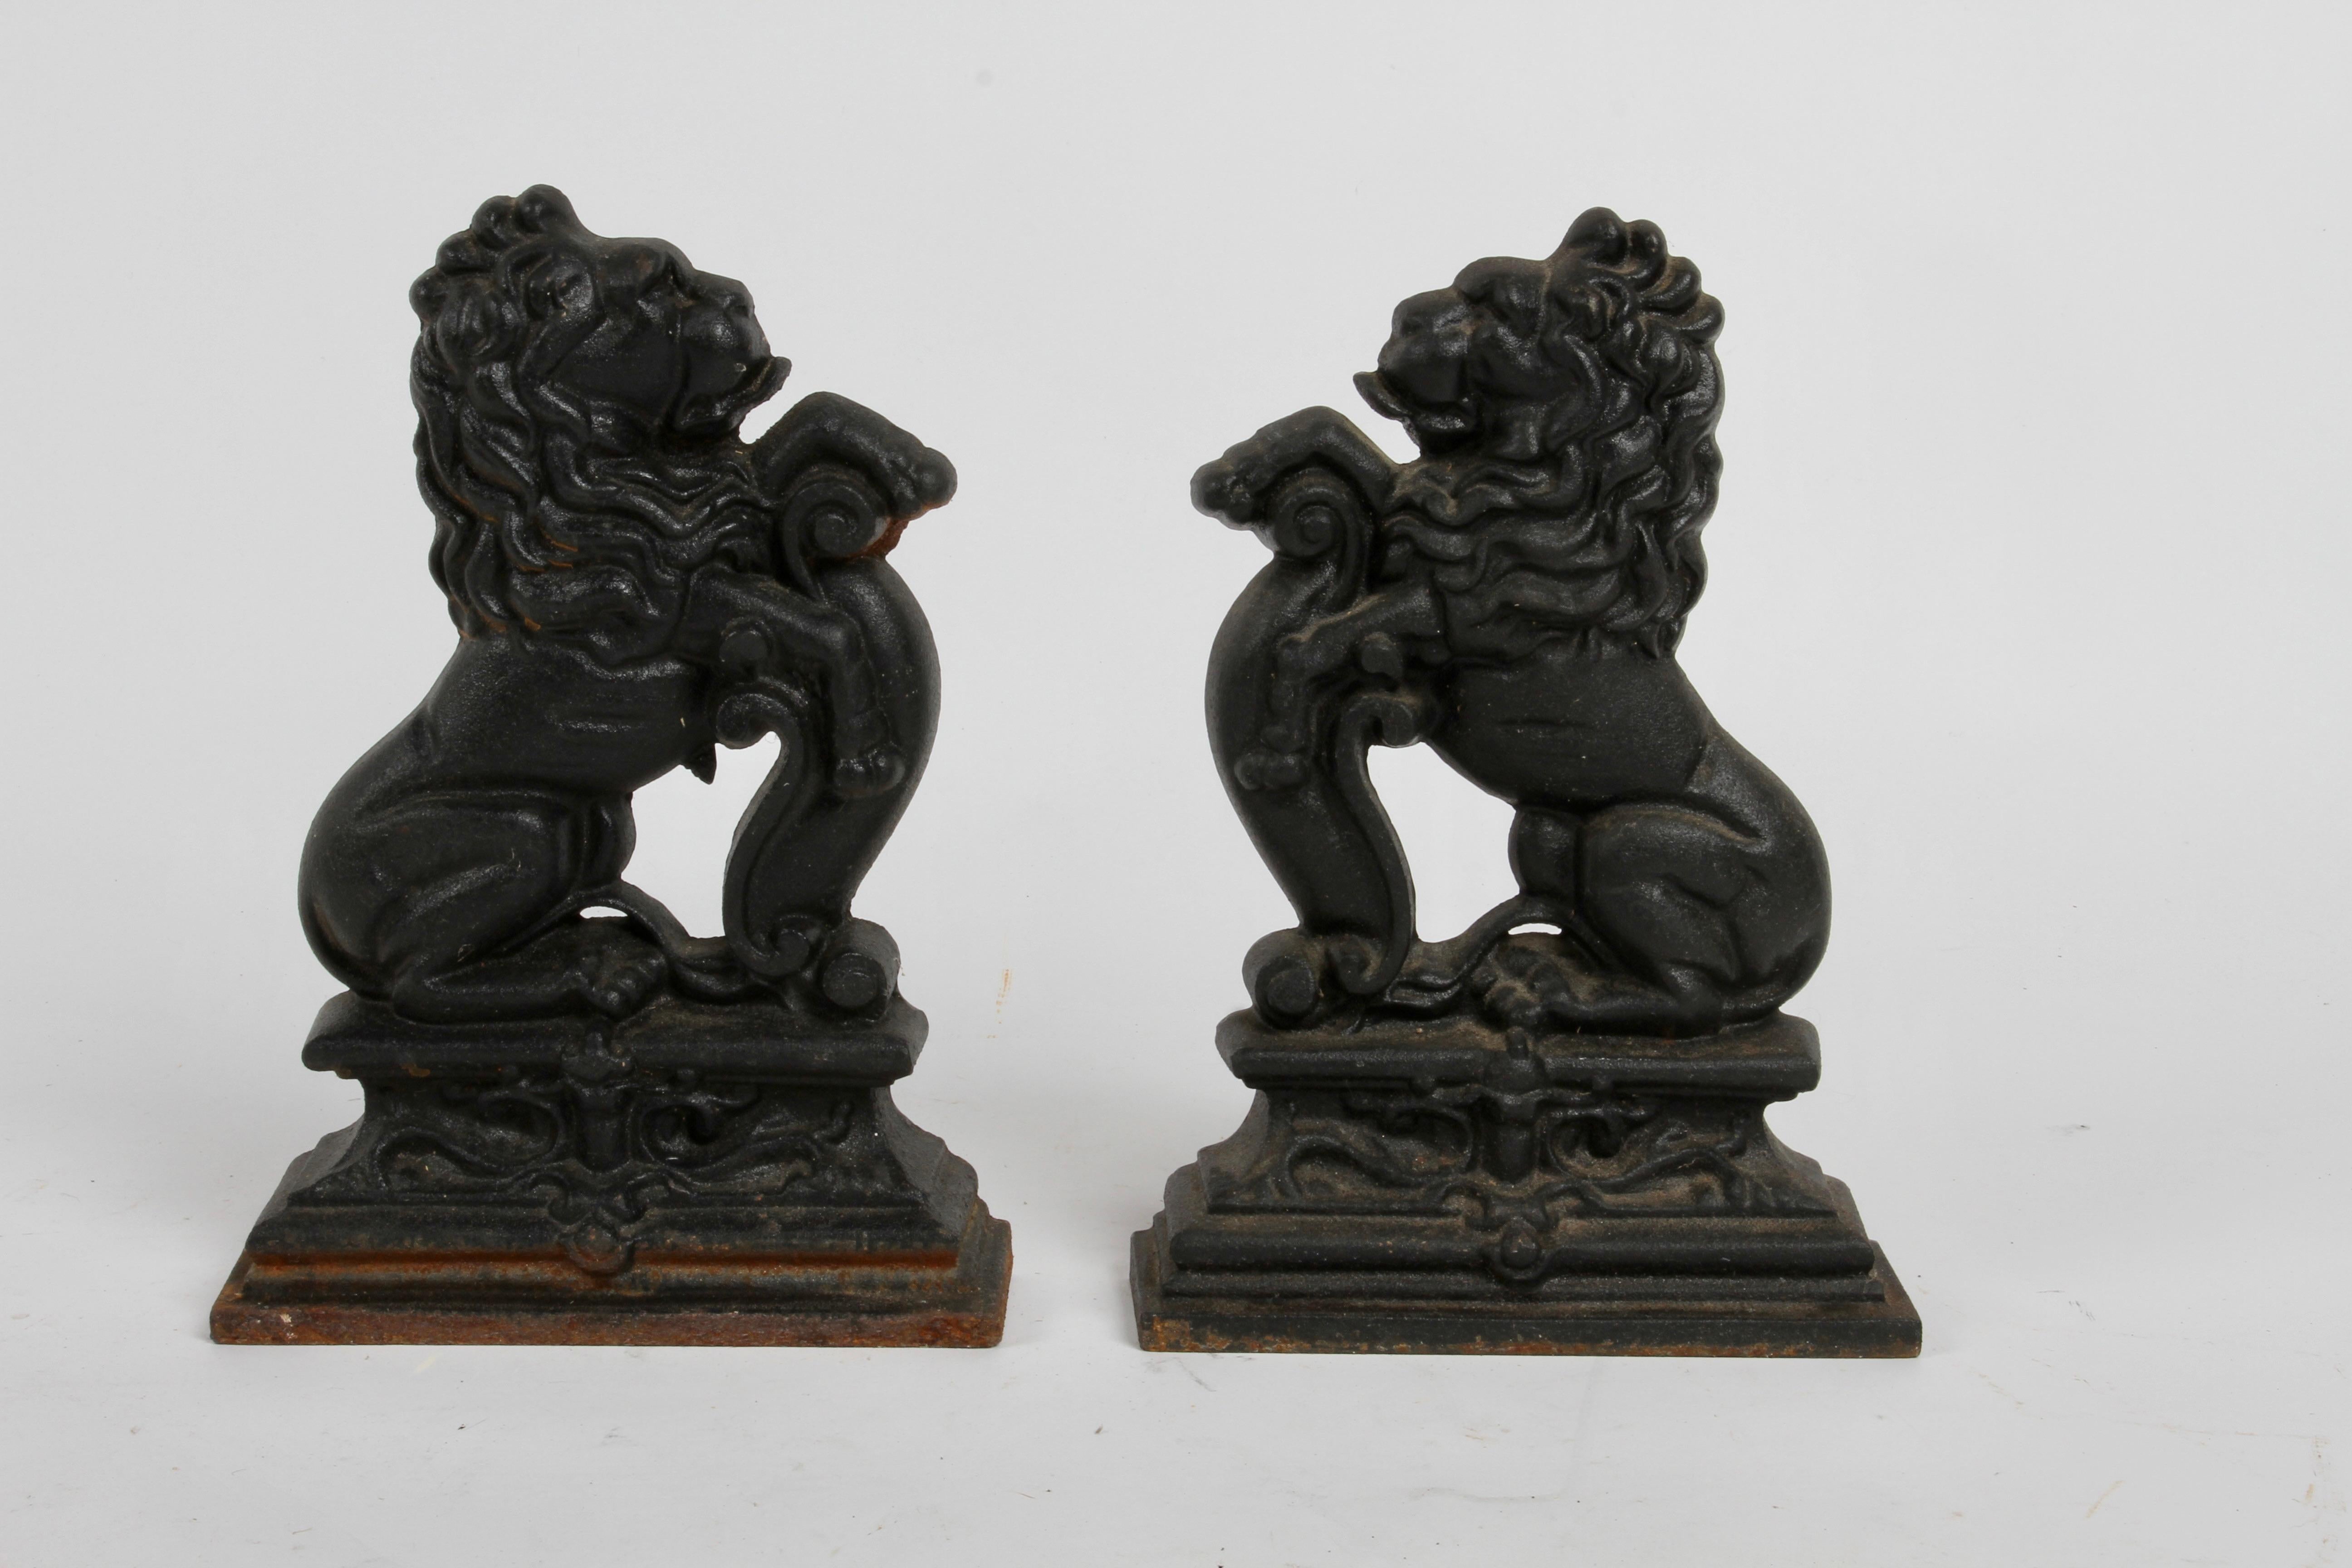 A wonderful pair of cast iron andirons or fire dogs, painted black and modeled as rampant lions standing on an integral plinth base. In the style of sculptor Alfred Stevens (1817-1875). Light rust to one of the bases, missing the iron log holders.